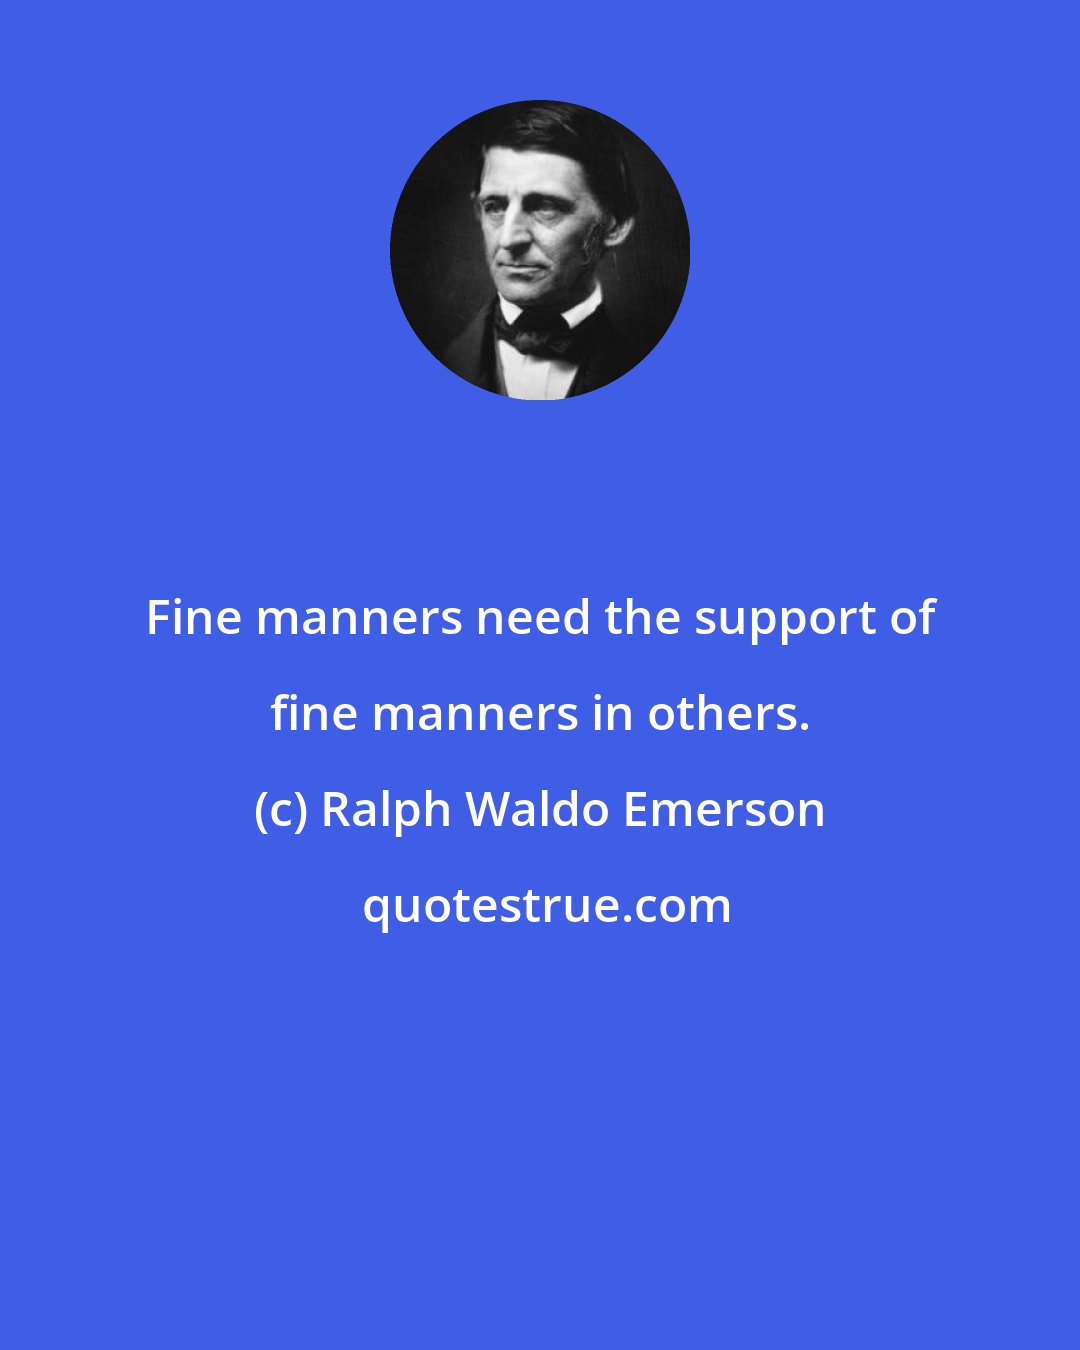 Ralph Waldo Emerson: Fine manners need the support of fine manners in others.